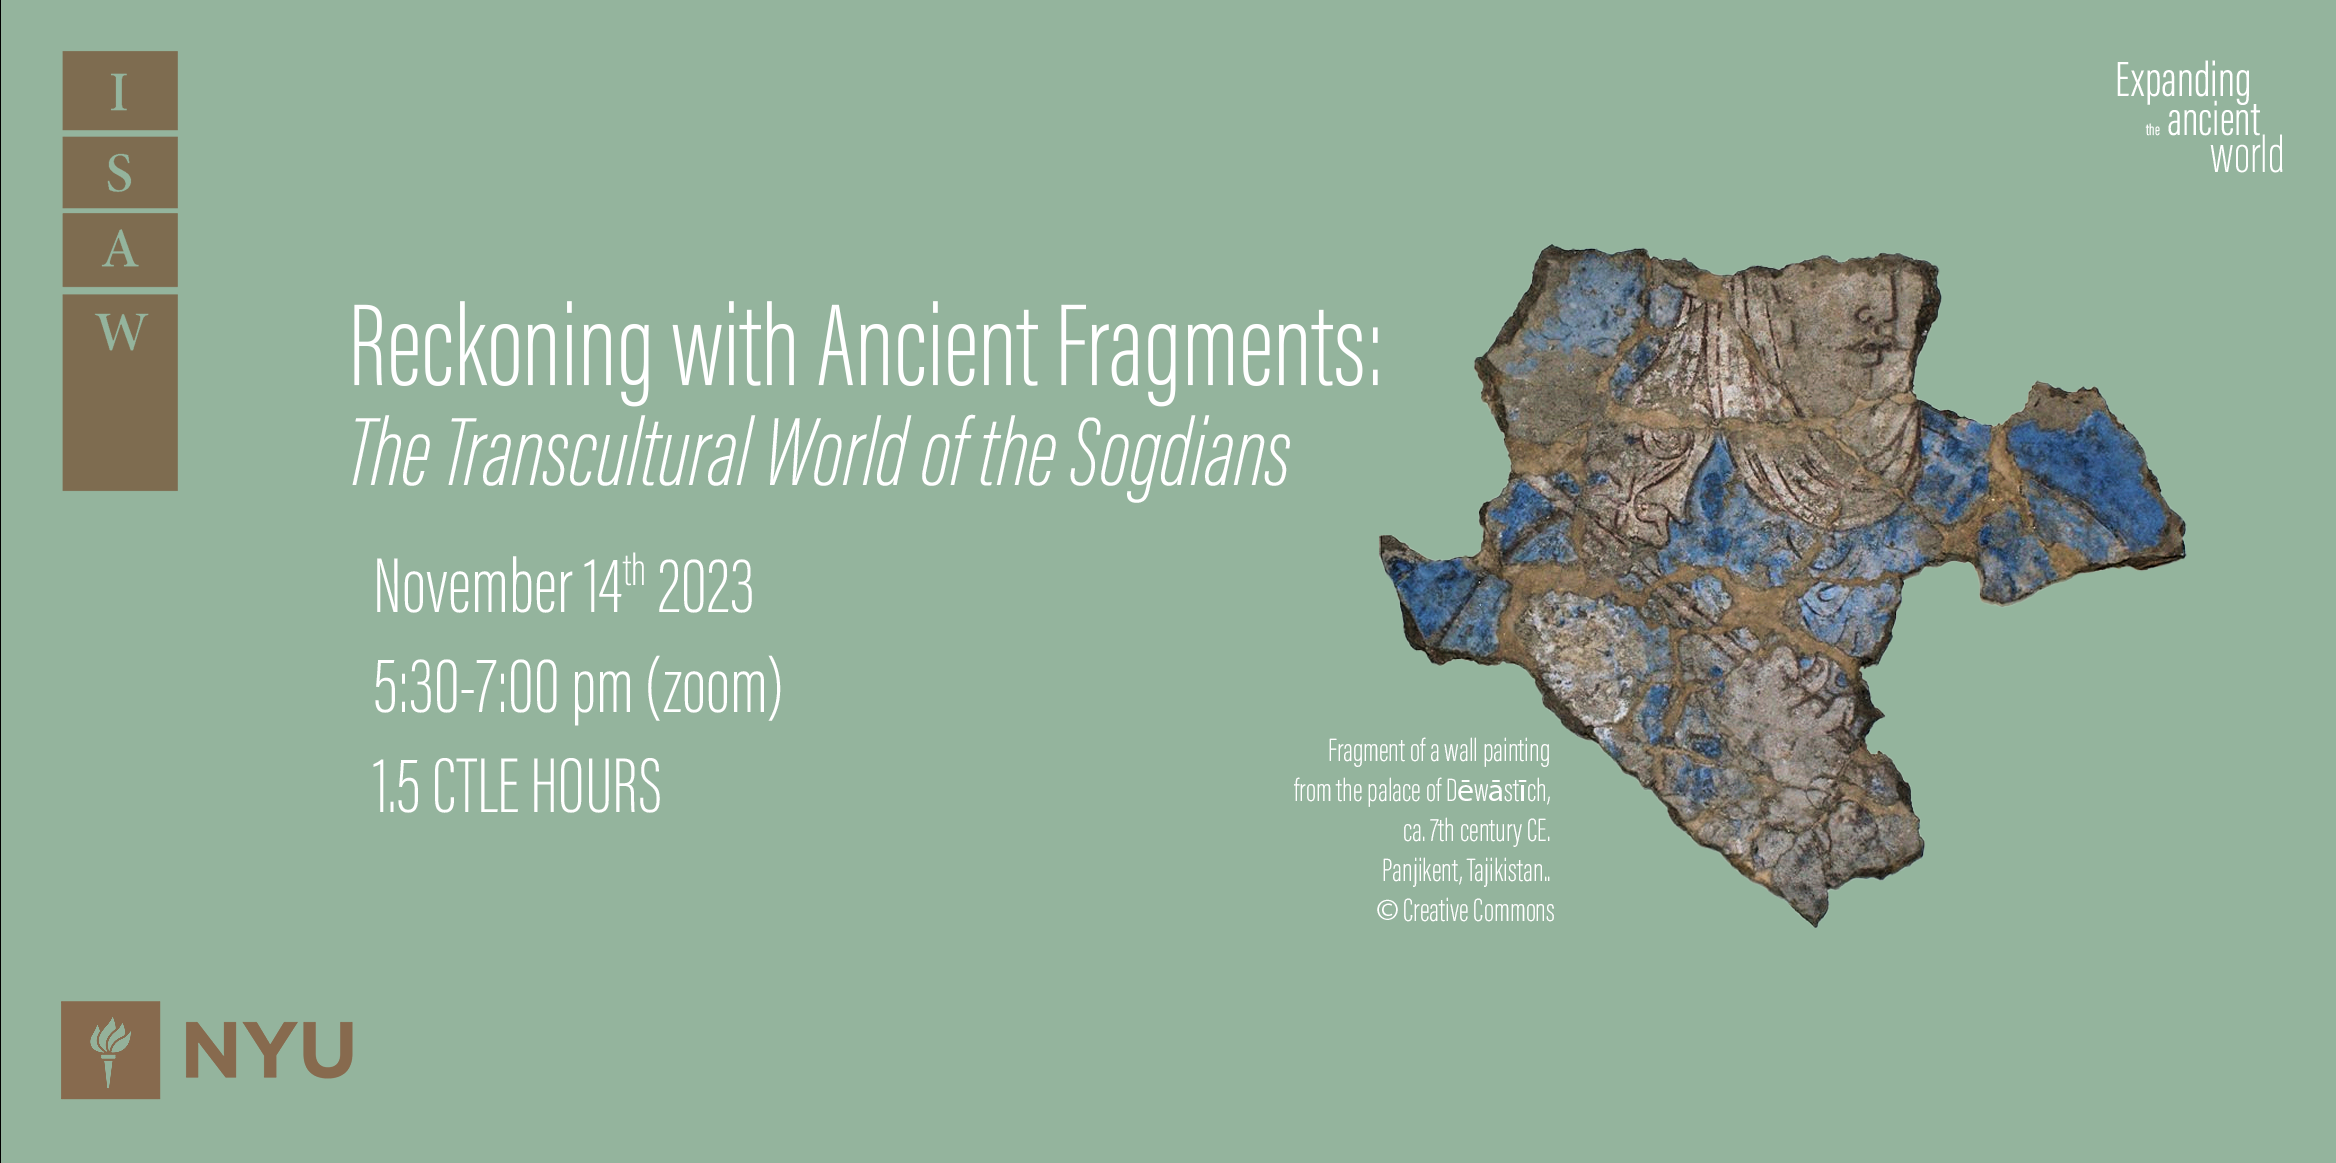 Expanding the Ancient World Workshop